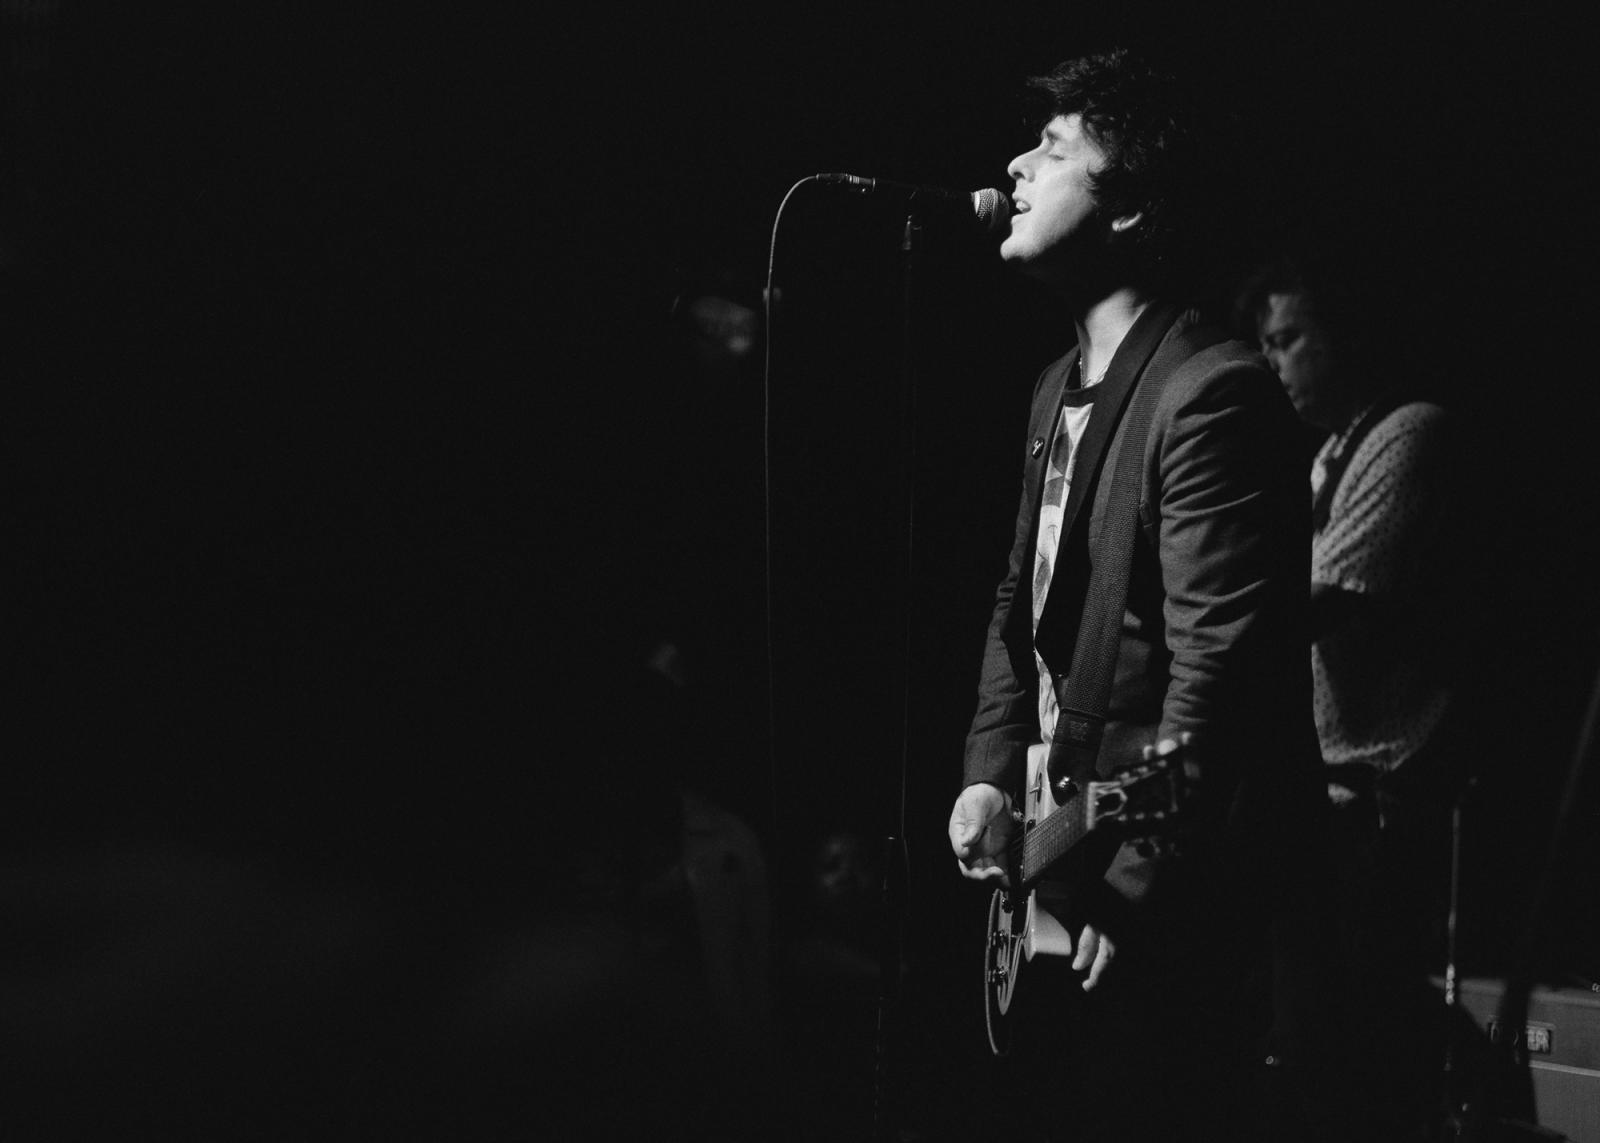 Music + Dance + Theatre - Billie Joe Armstrong performing with his side project...